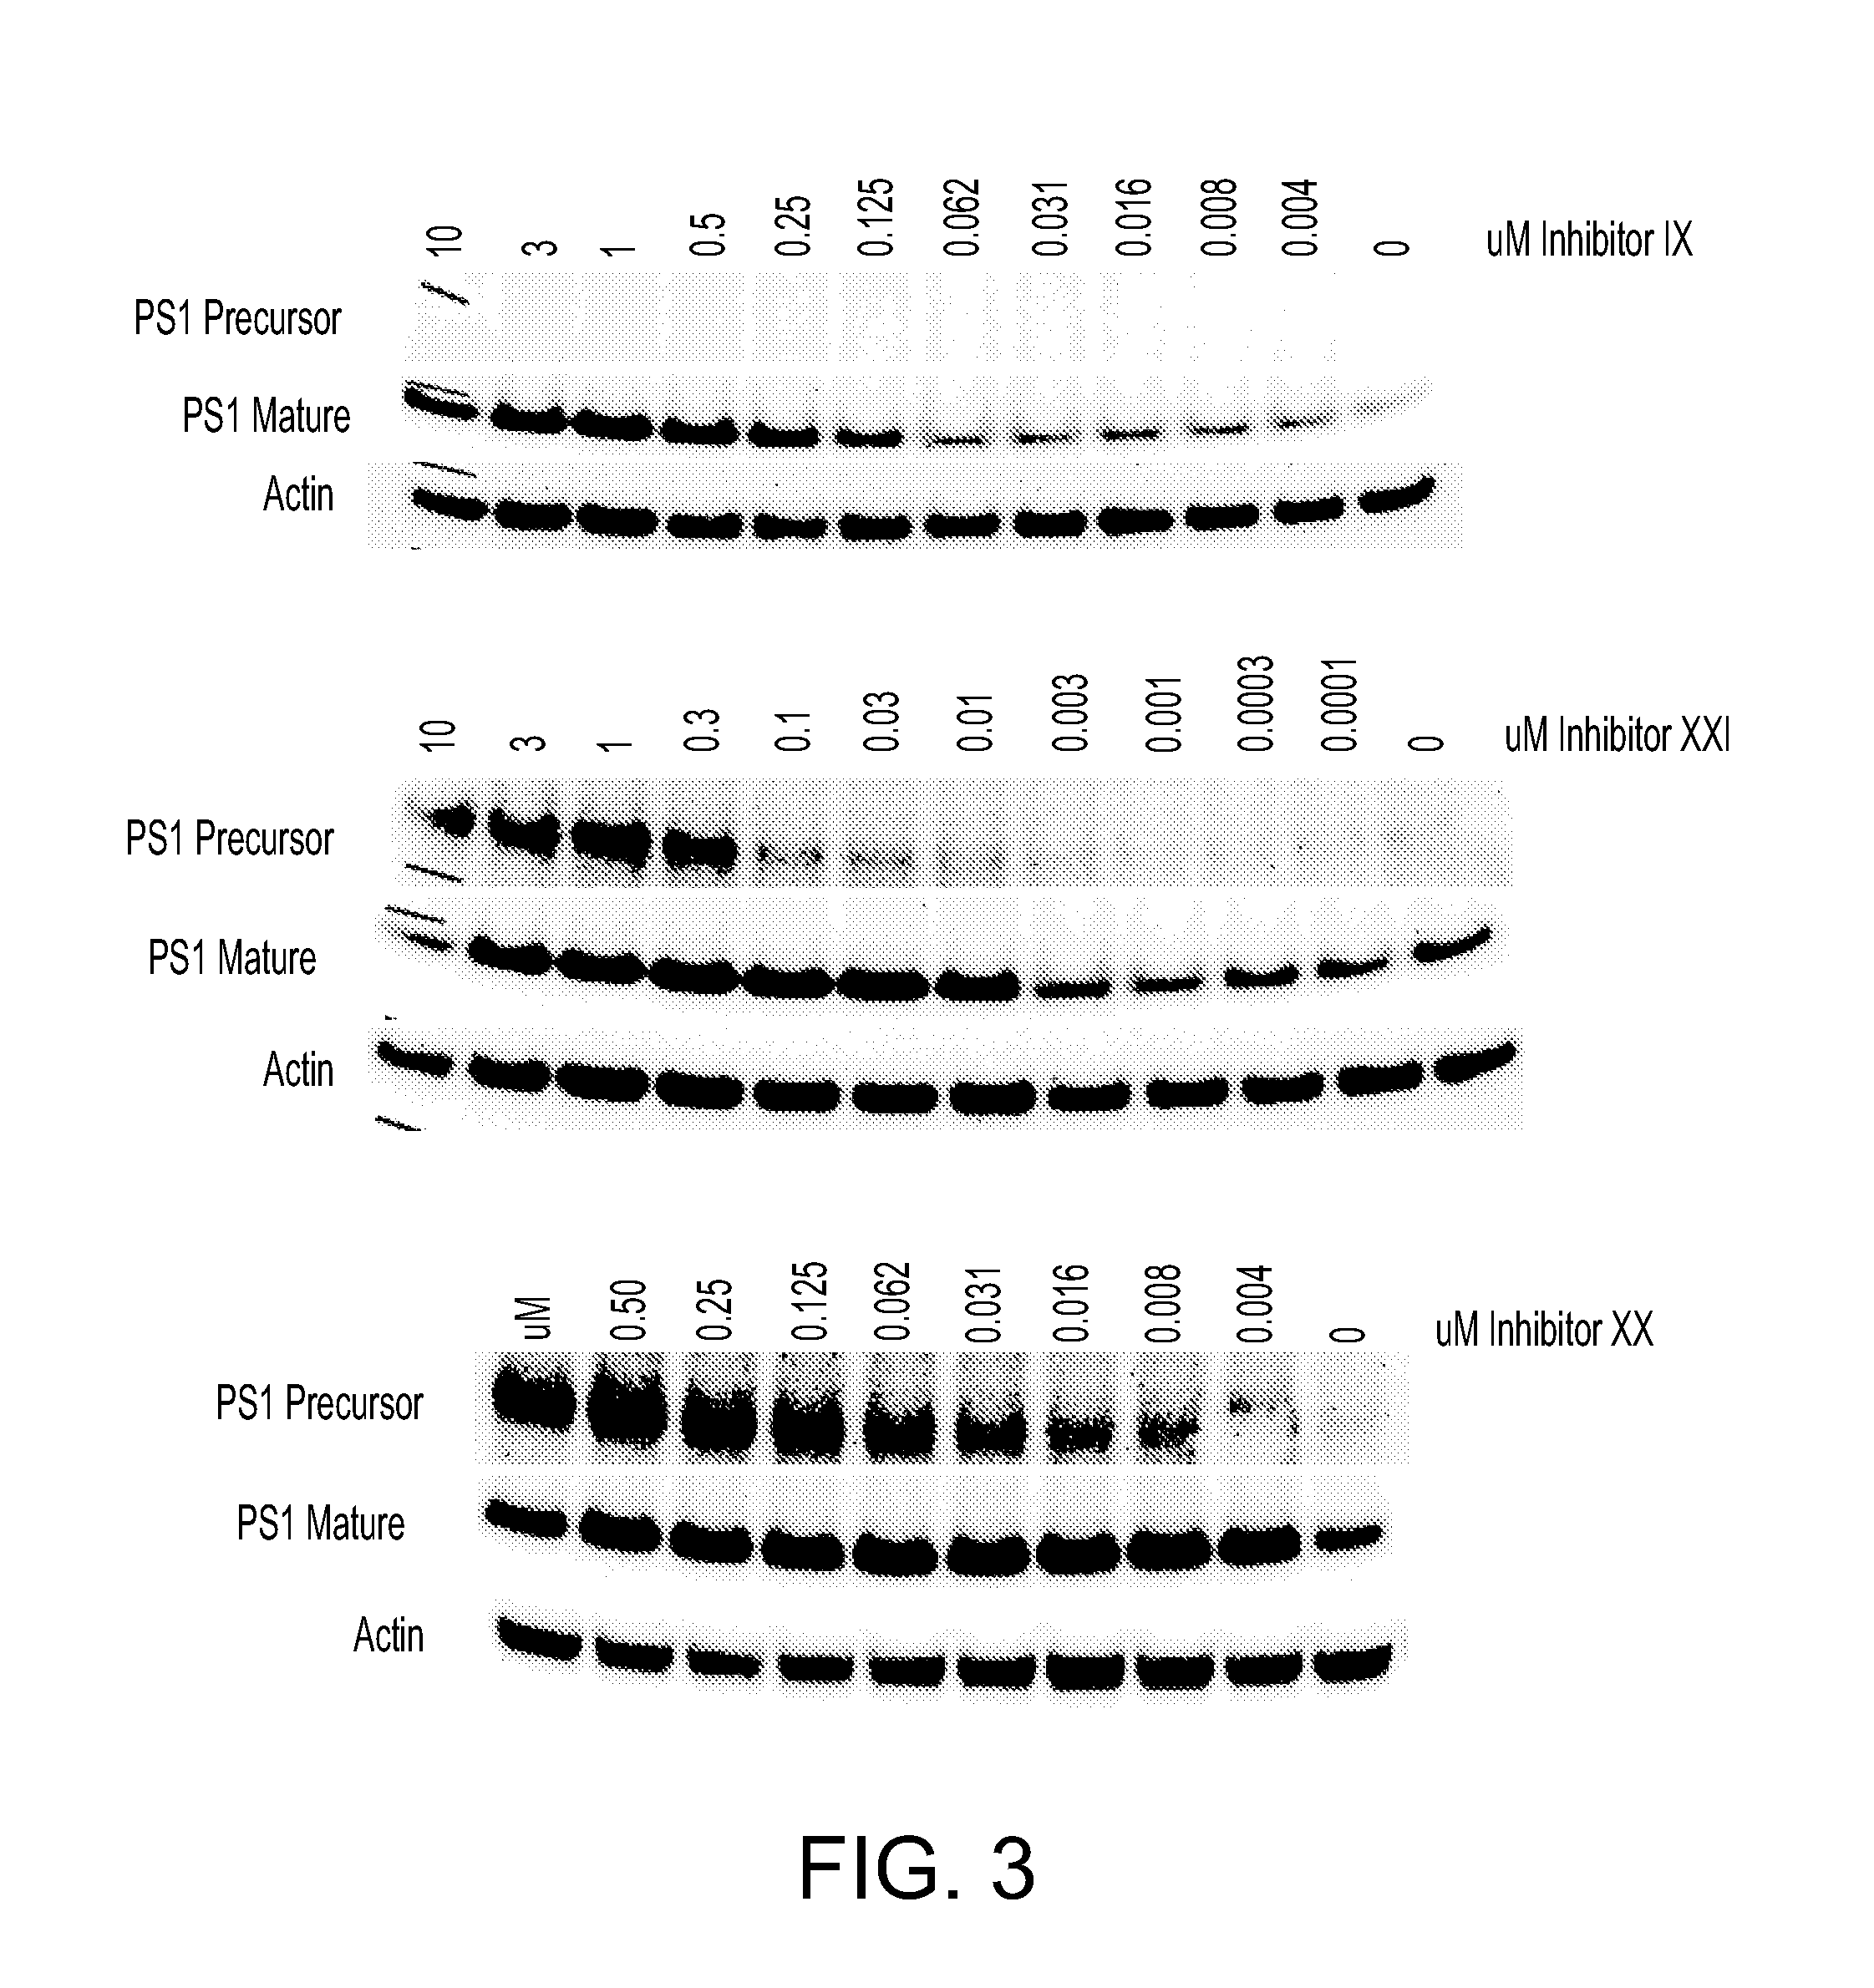 Method of treating alzheimer's disease using pharmacological chaperones to increase presenilin function and gamma-secretase activity